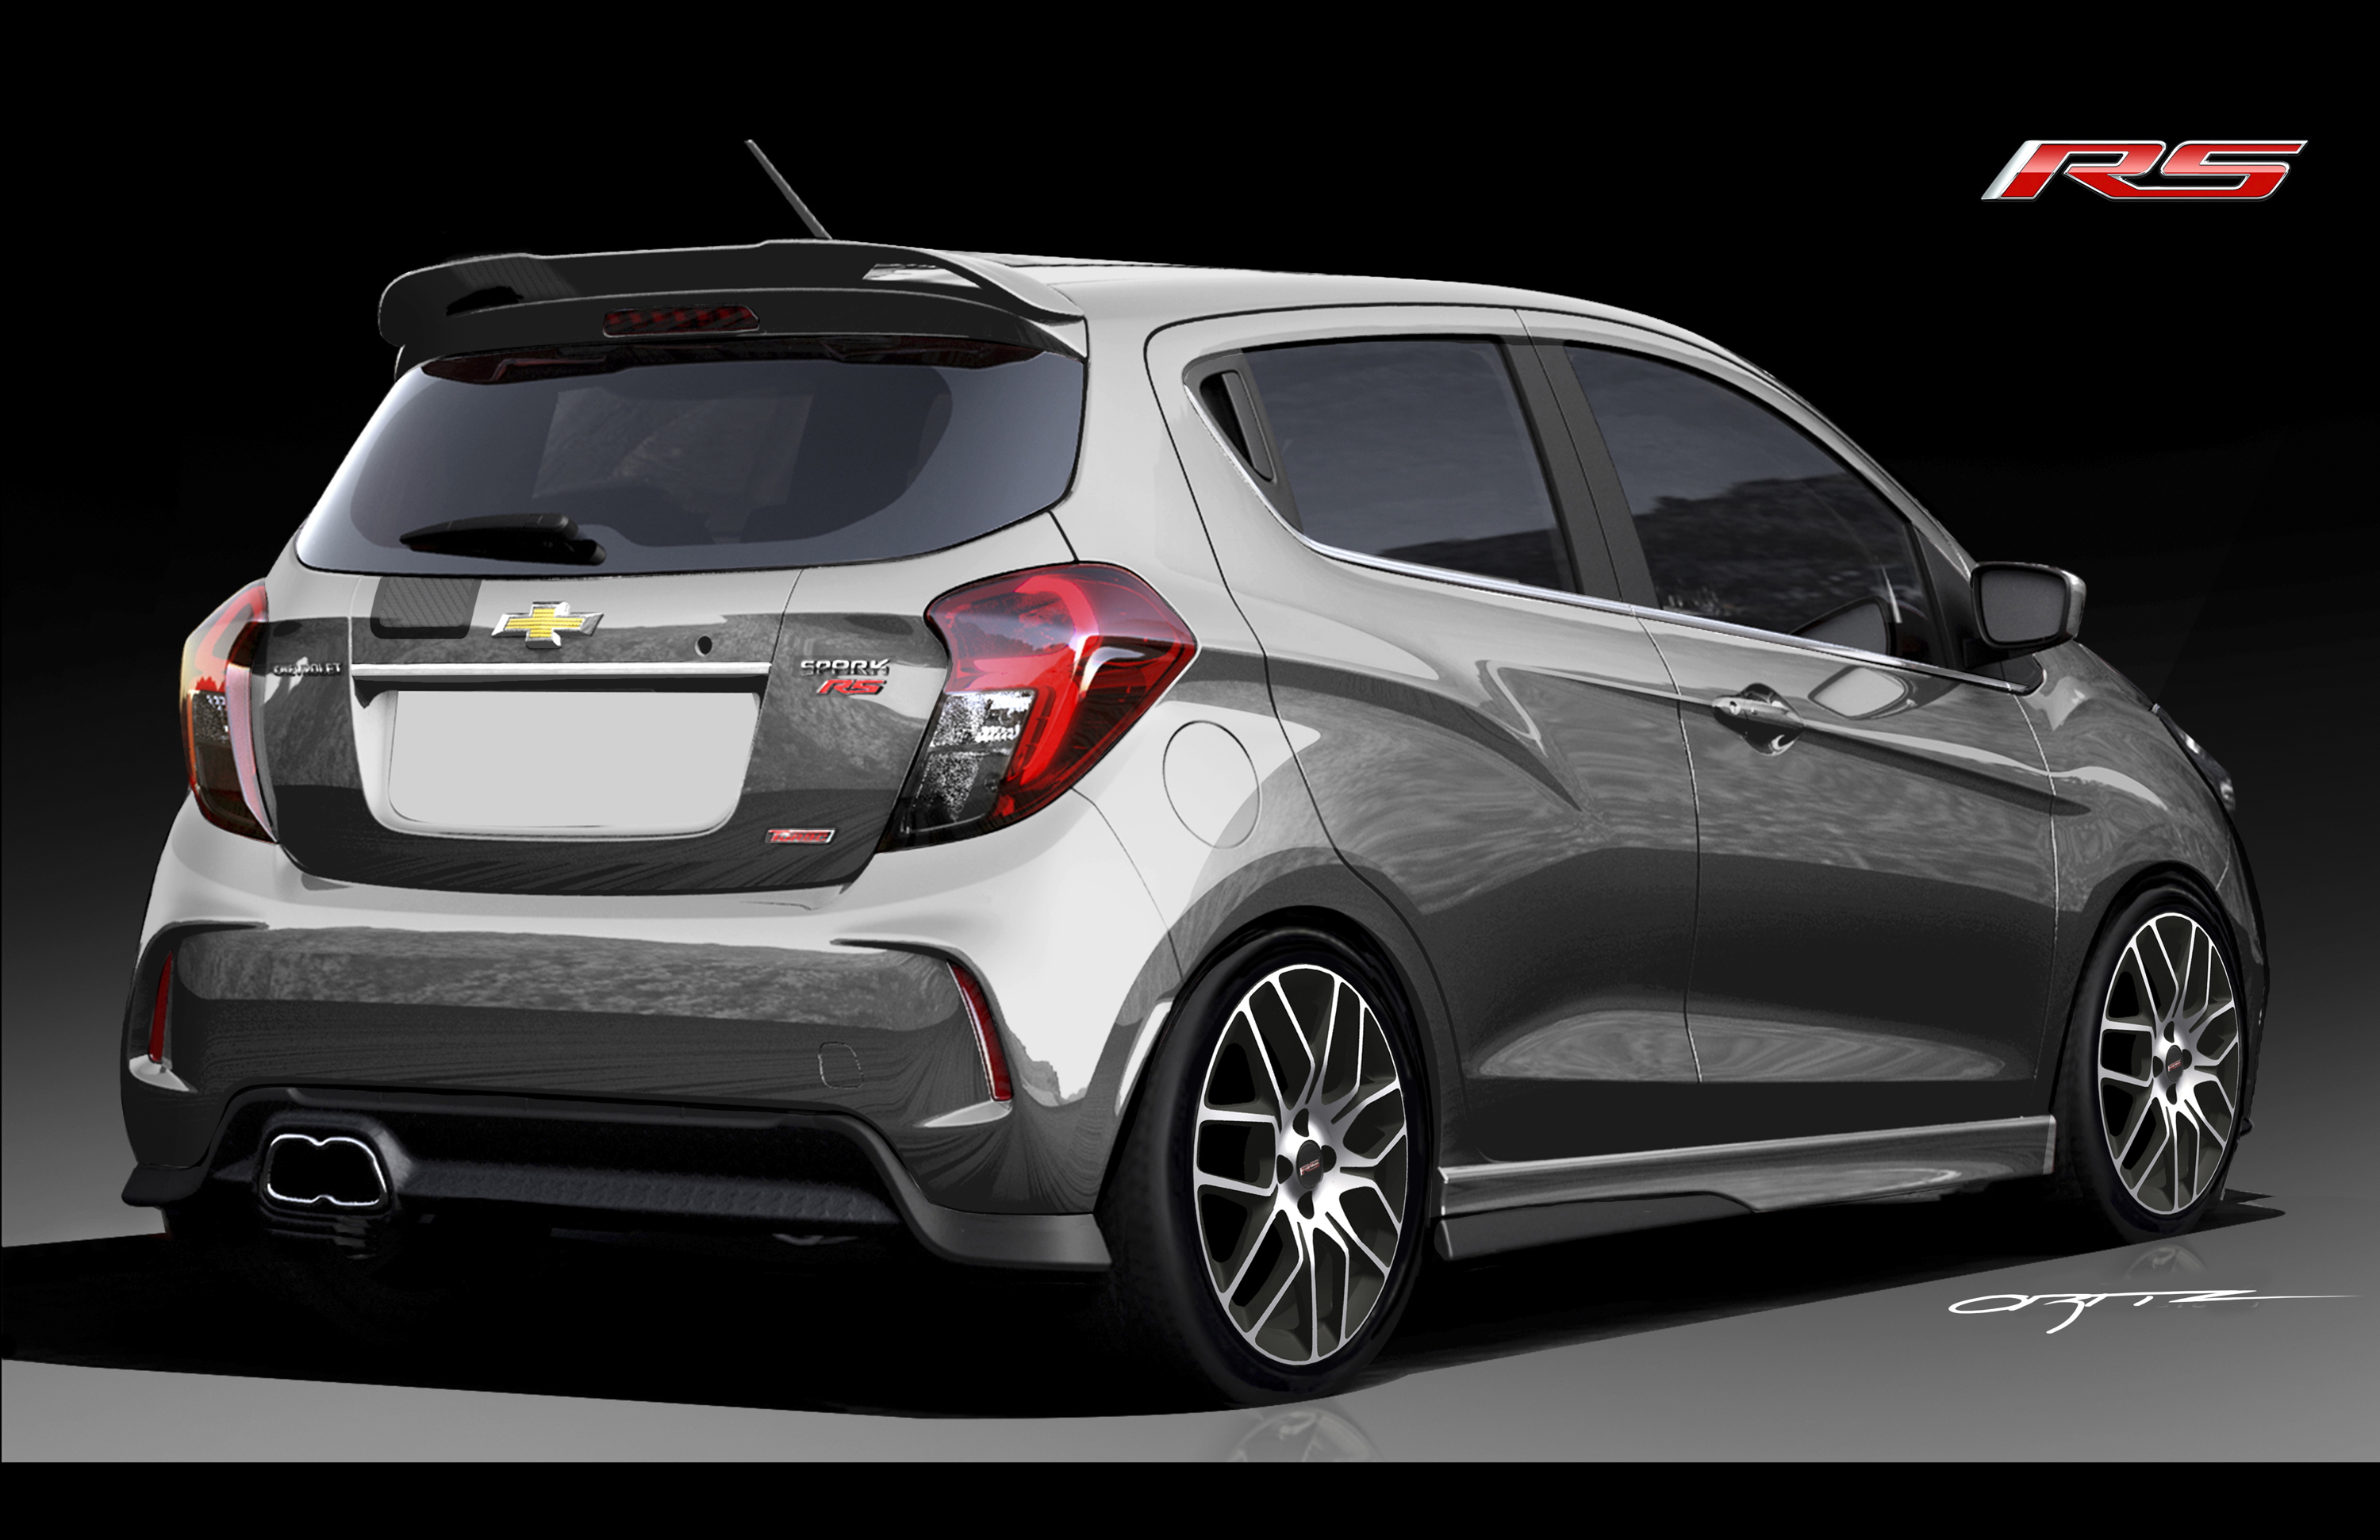 GM Says 2016 Chevrolet Spark RS Has The DNA Of The Corvette